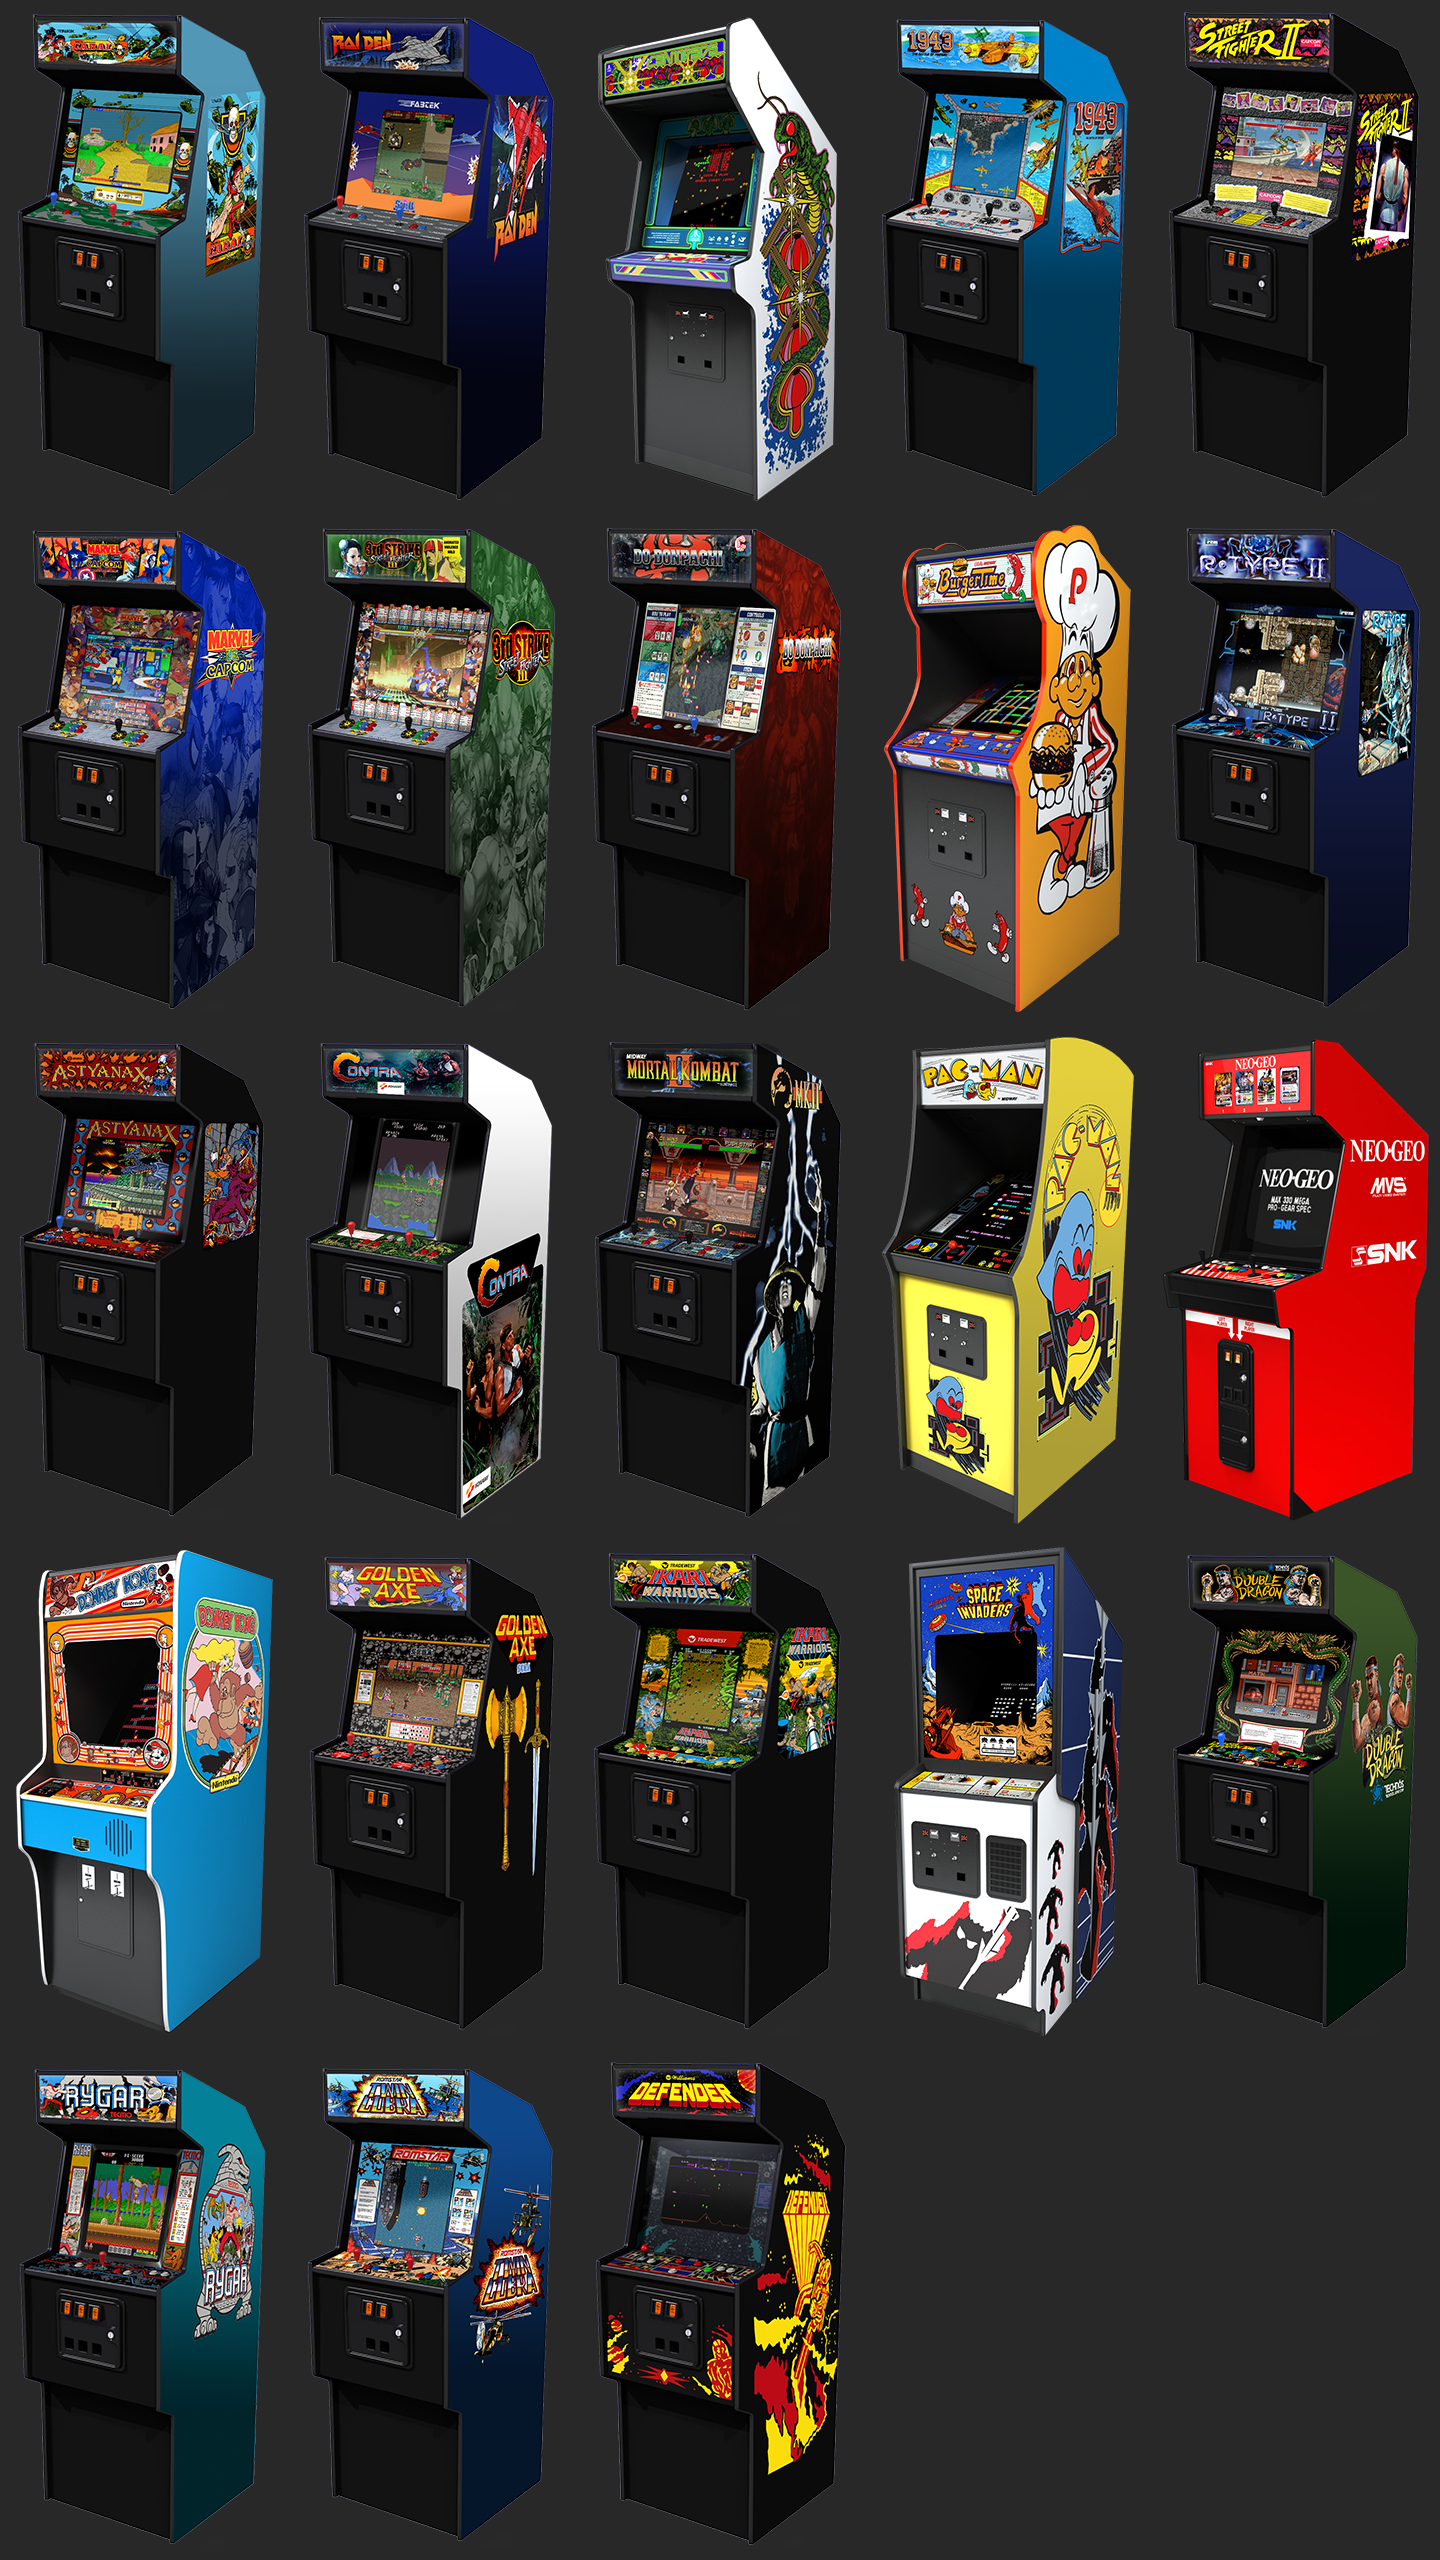 More information about "Arcade Cabinet Platform Banners"